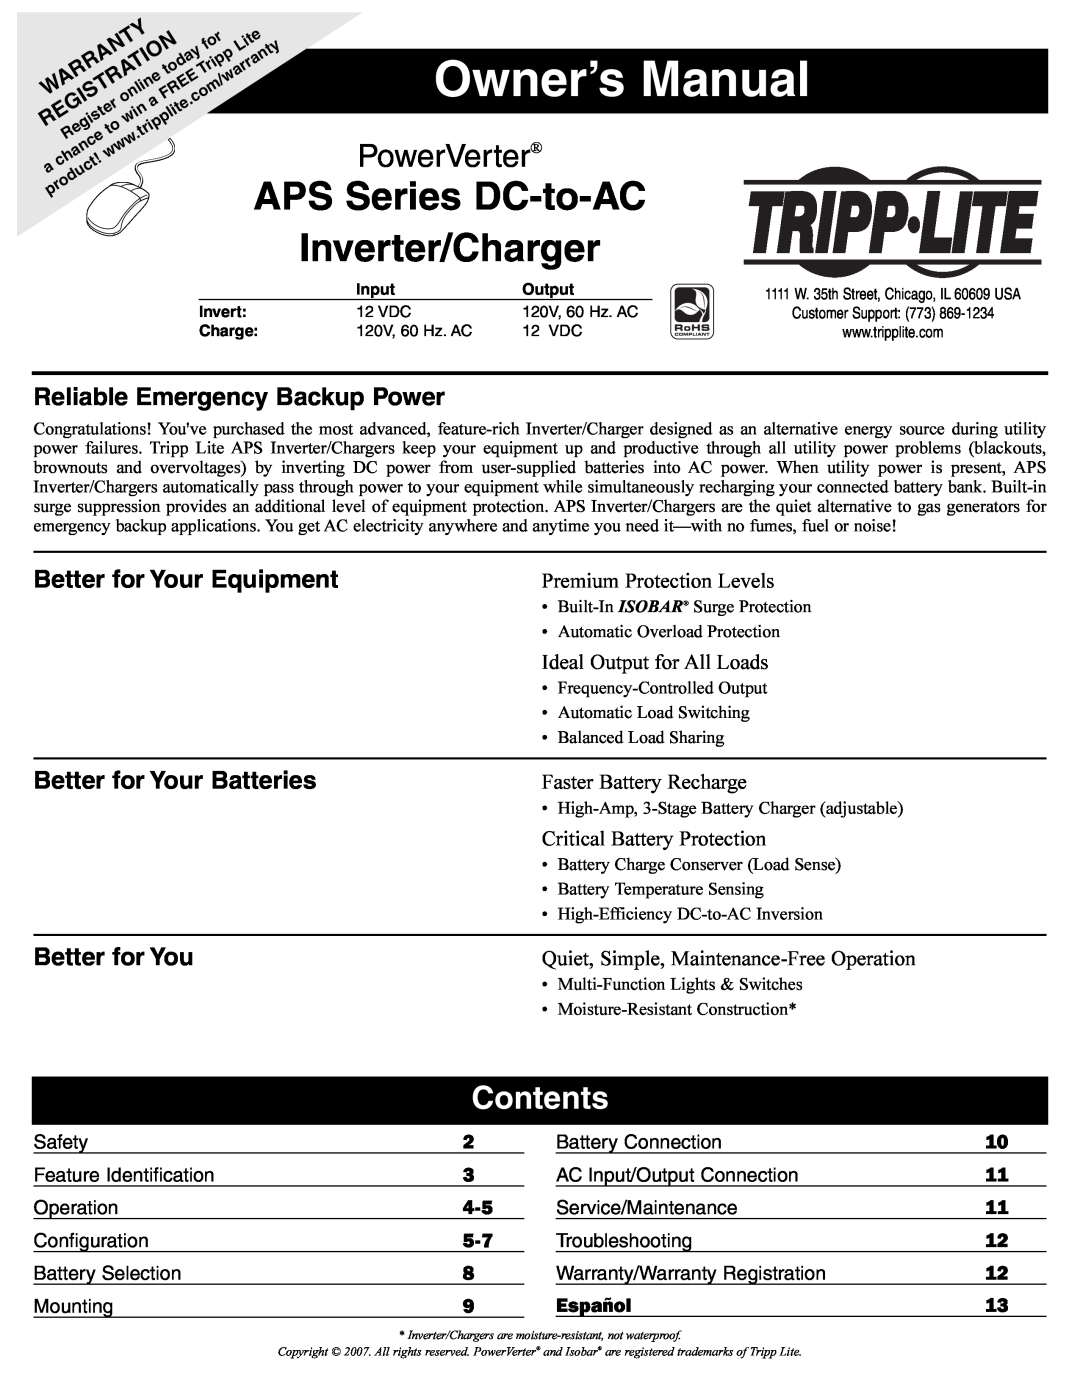 Tripp Lite APSRM4 owner manual Contents, Reliable Emergency Backup Power, Better for Your Equipment, Warranty, PowerVerter 